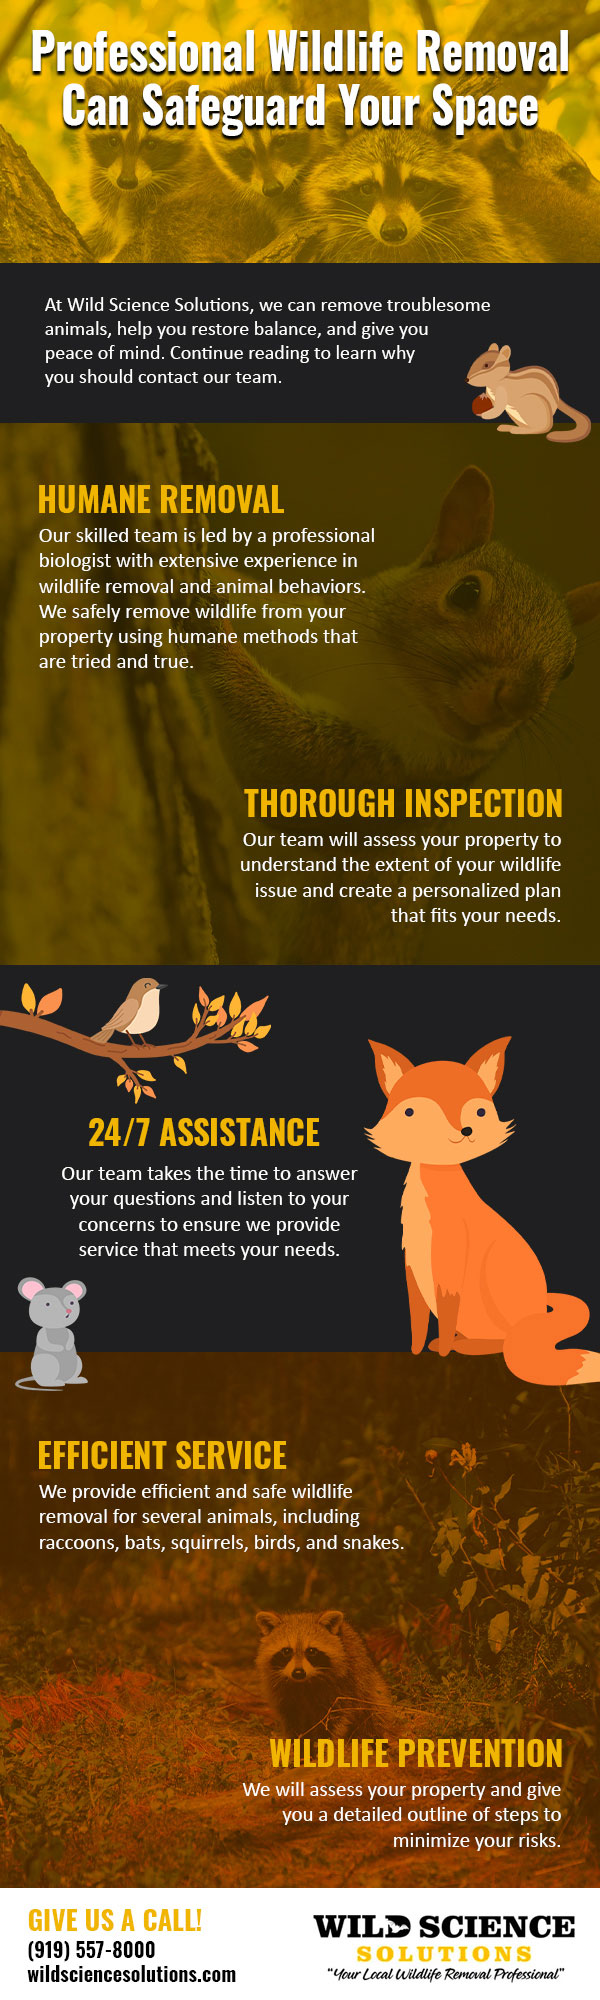 Professional Wildlife Removal Can Safeguard Your Space